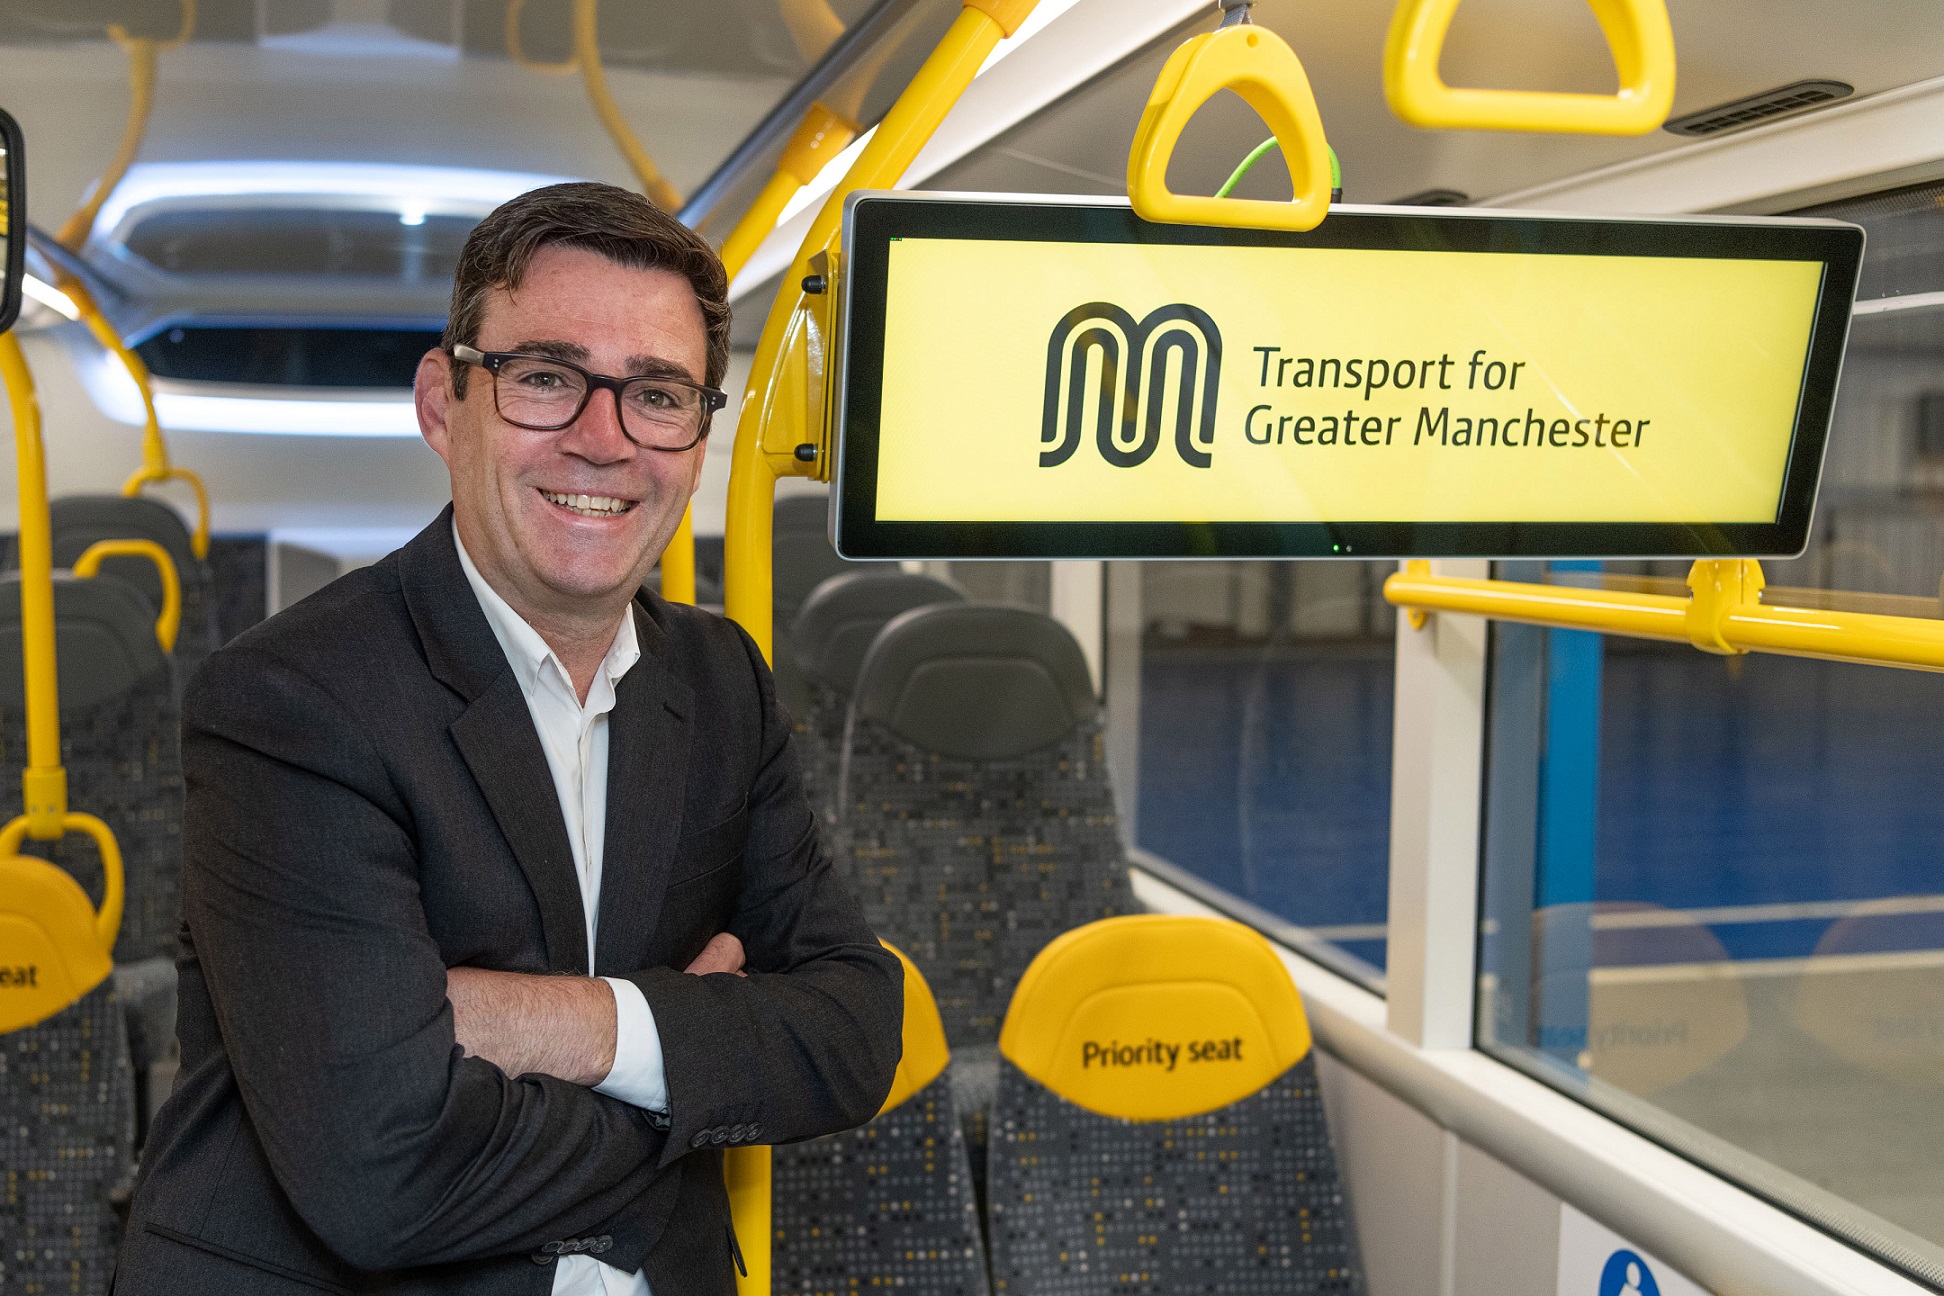 Franchised bus services shortly to begin in Greater Manchester